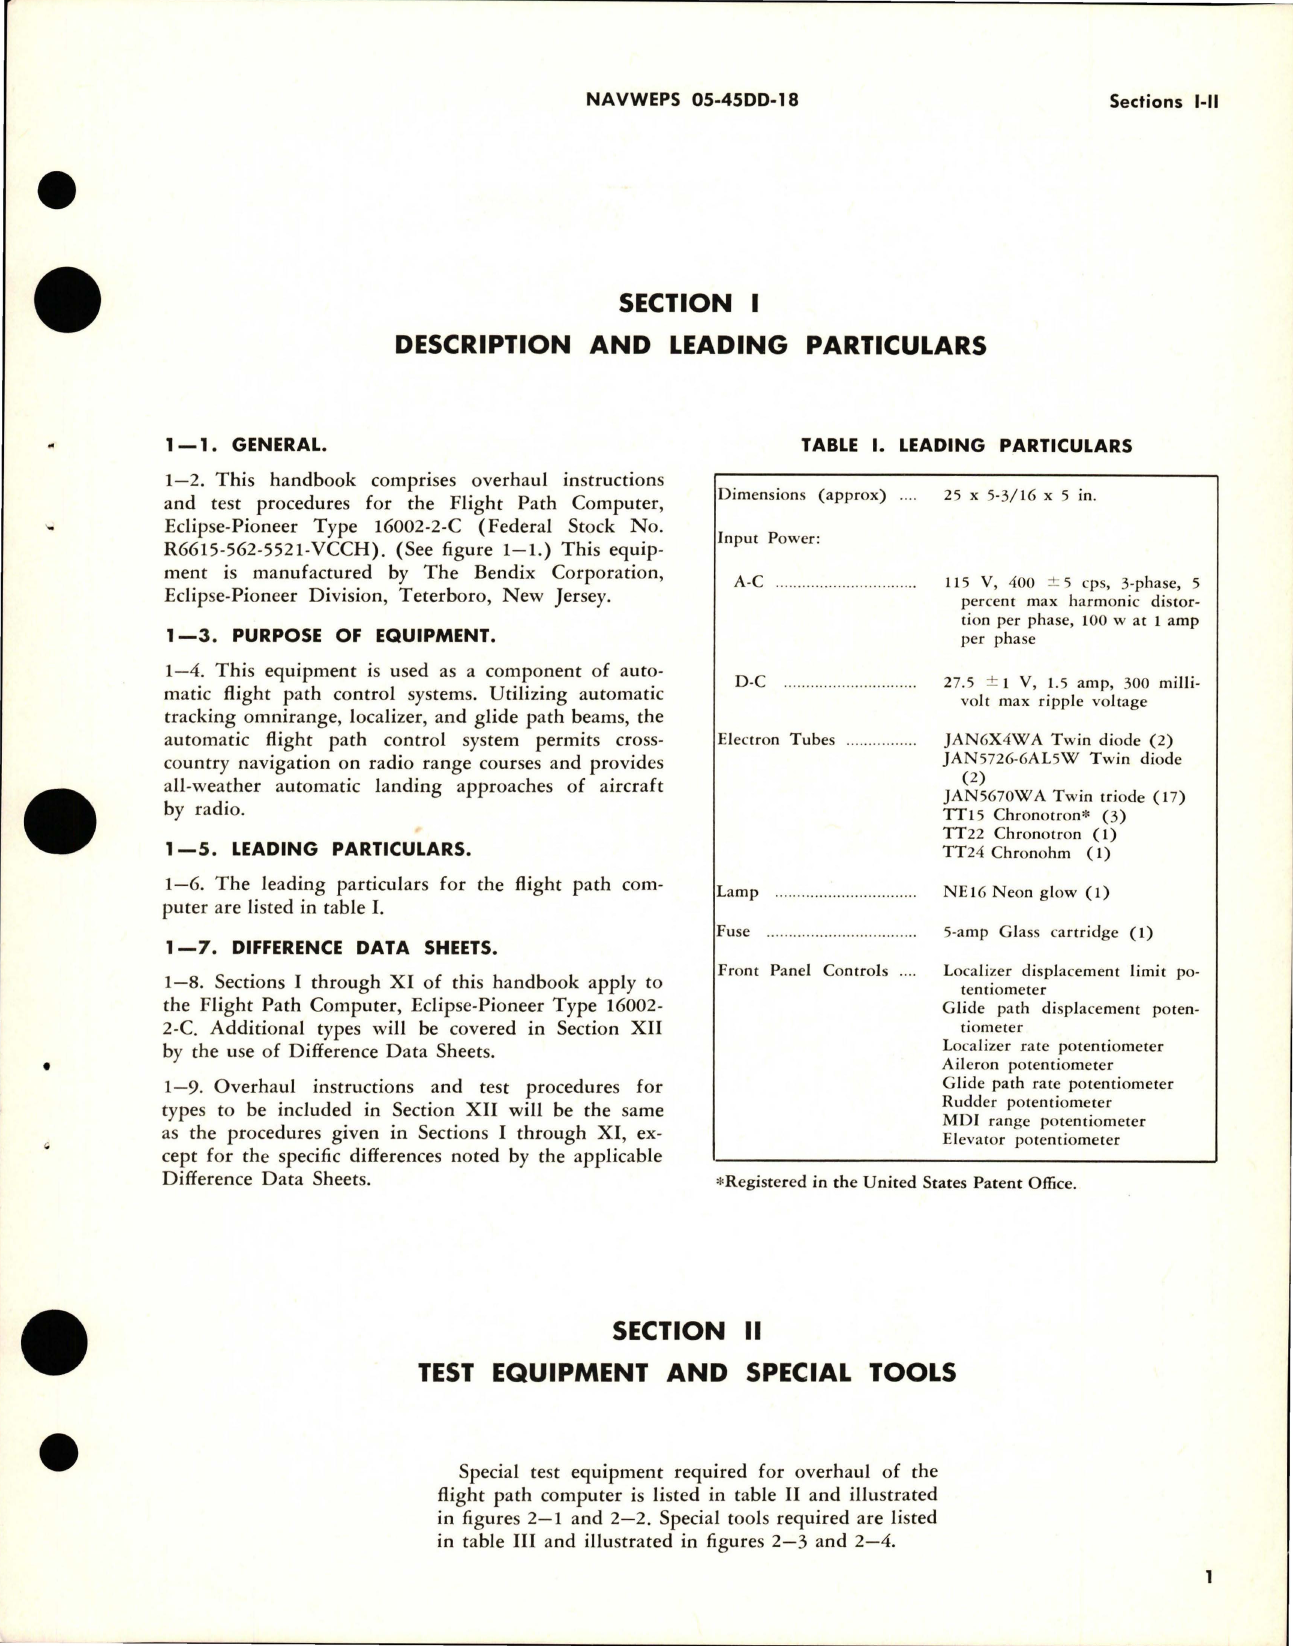 Sample page 7 from AirCorps Library document: Overhaul Instructions for Flight Path Computer - Part 16002-2-C